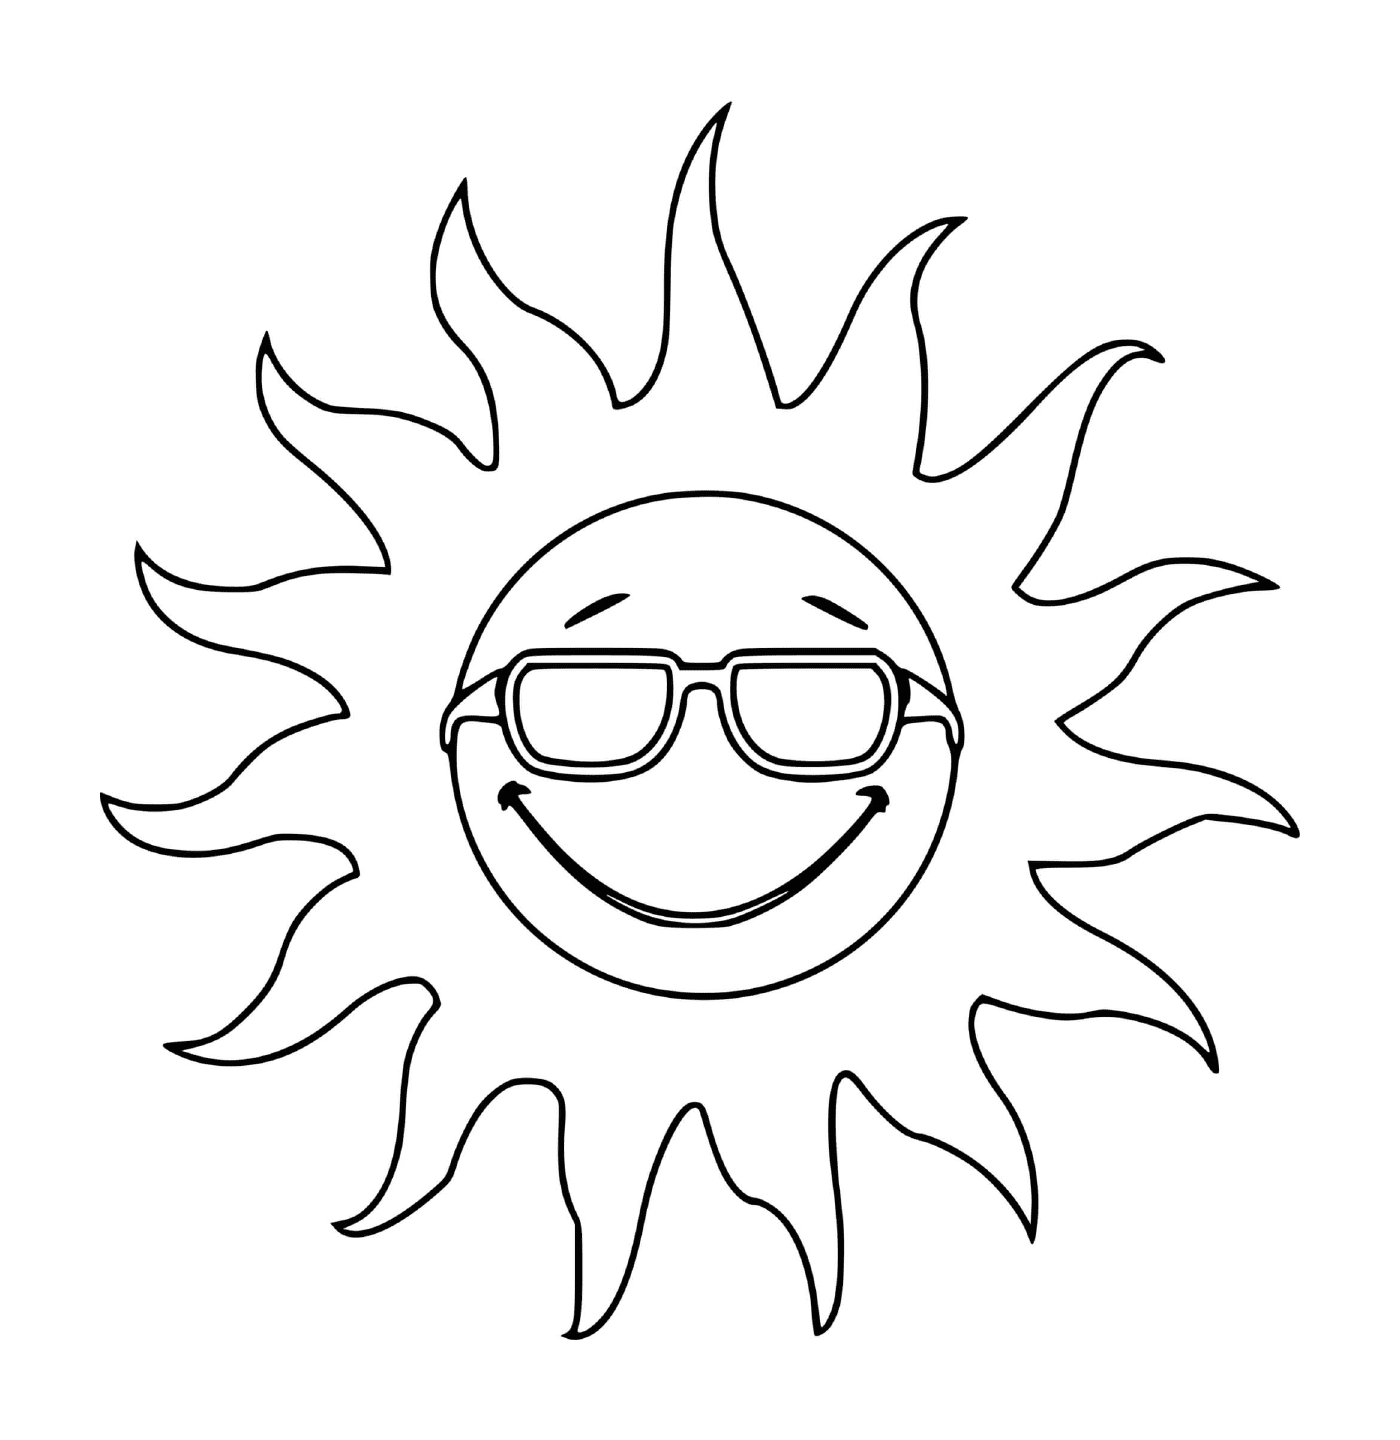  Smileing sun with glasses 